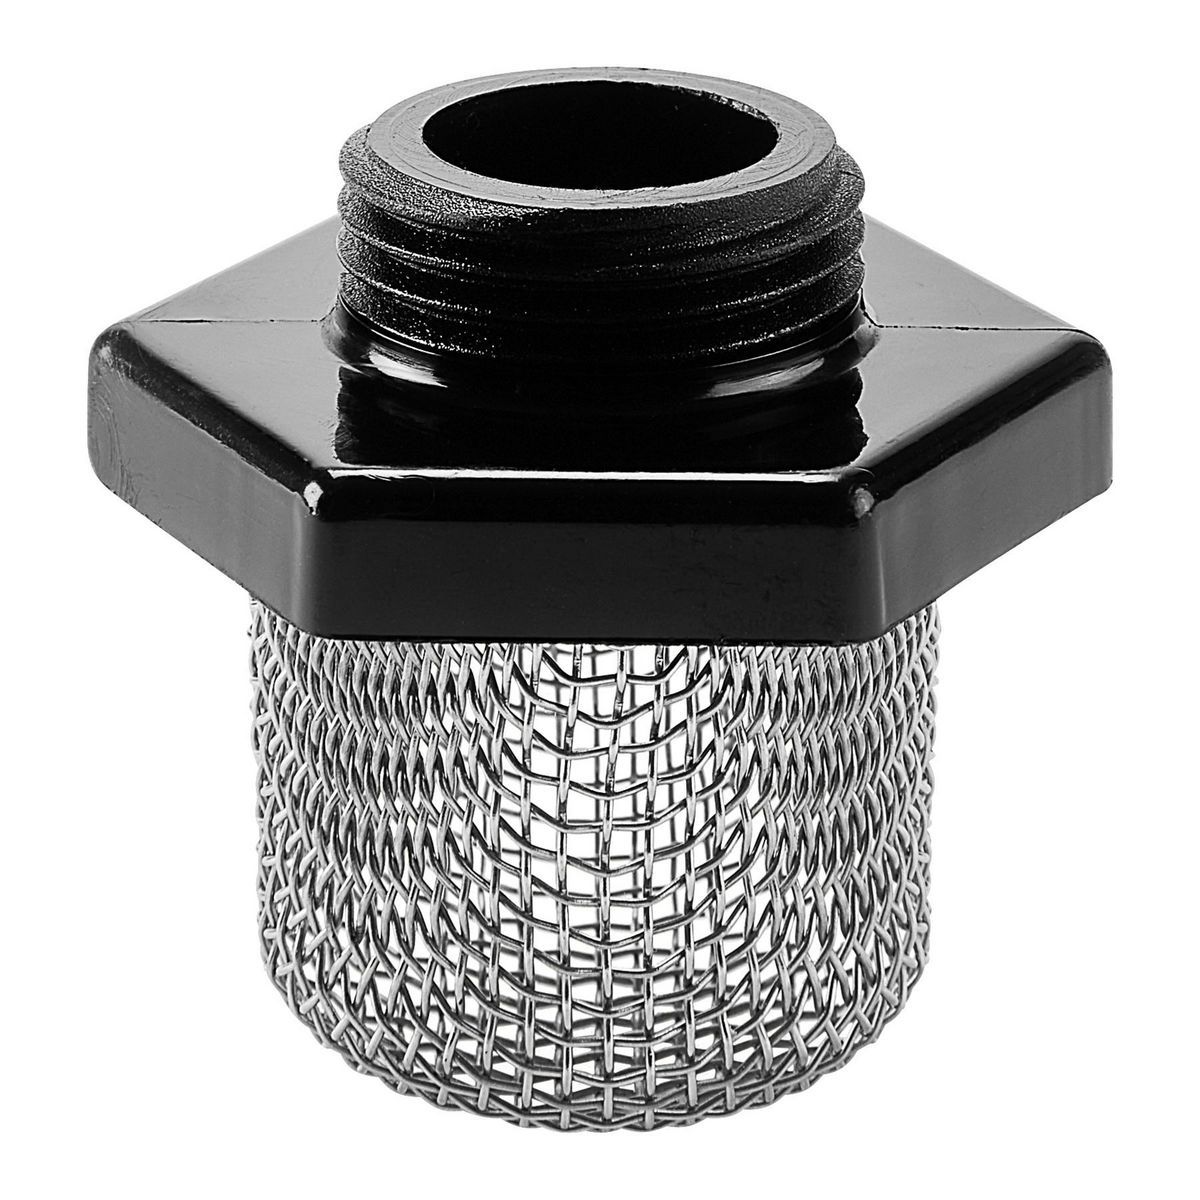 AVANTI Pro Inlet Strainer for Floor Based Airless Paint and Stain Sprayers